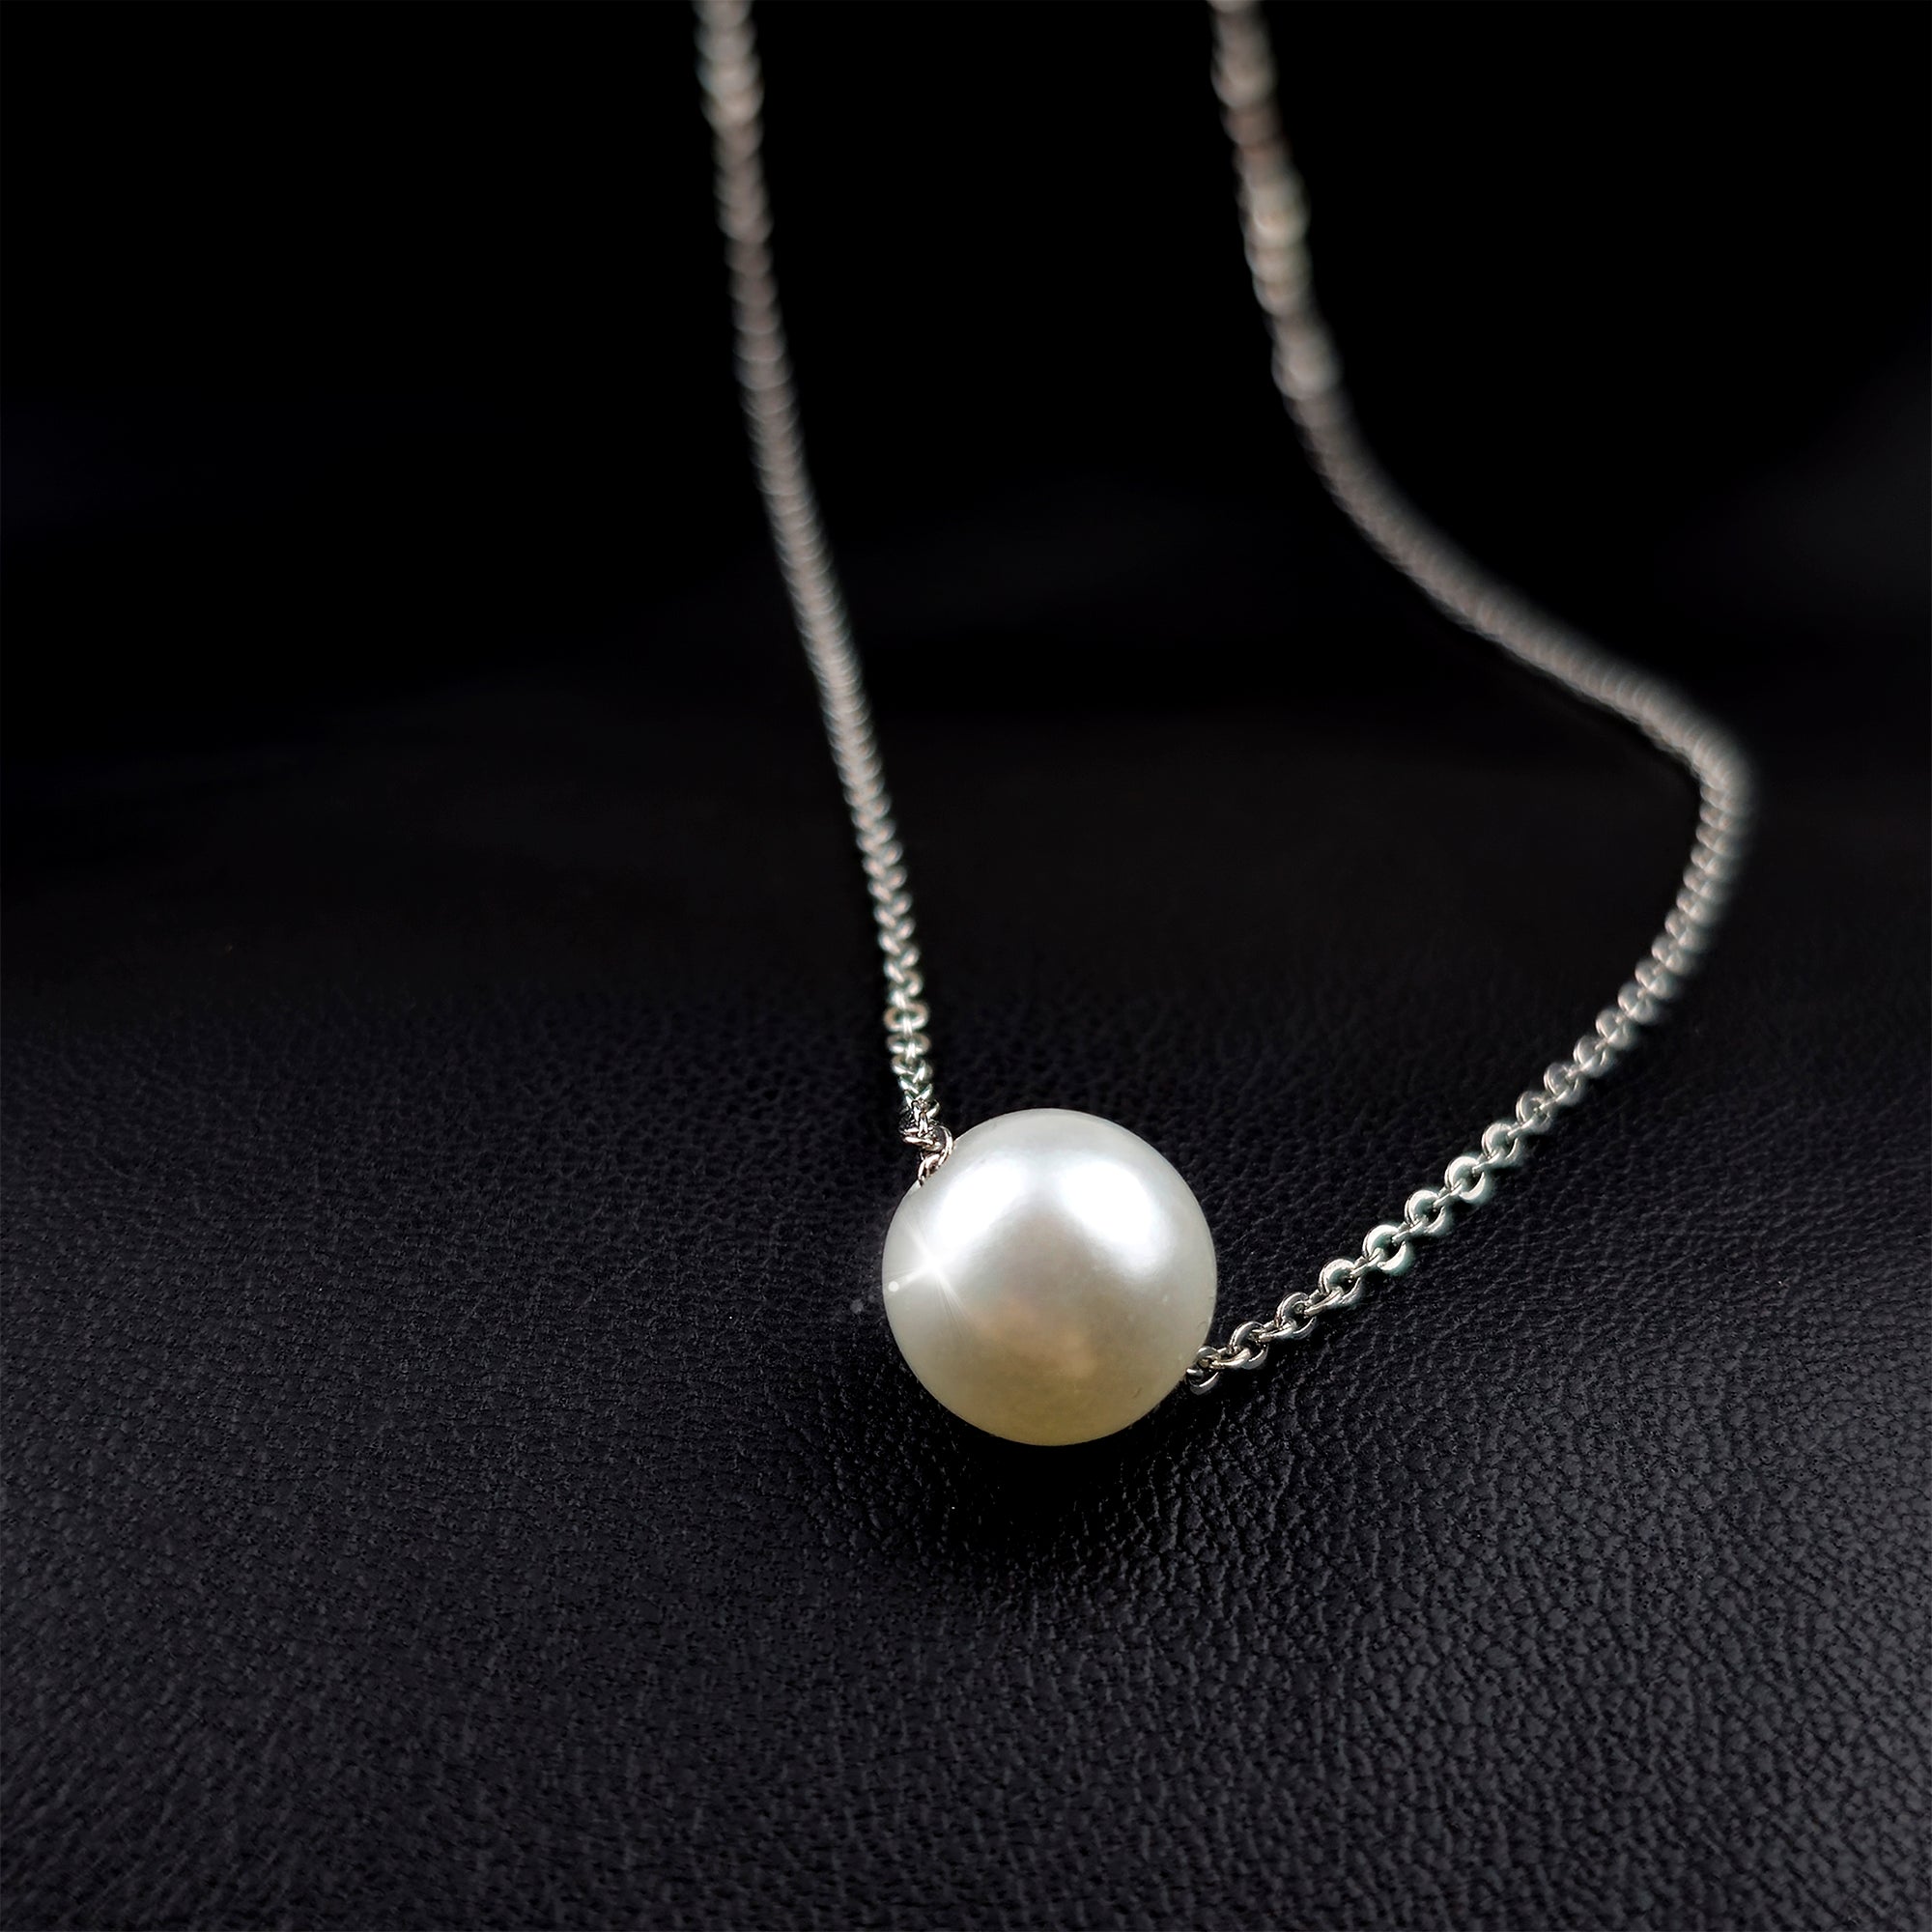 Stainless Steel Chain Necklace Minimalist Pearl Pendant Necklace, 20 inch - Body Candy